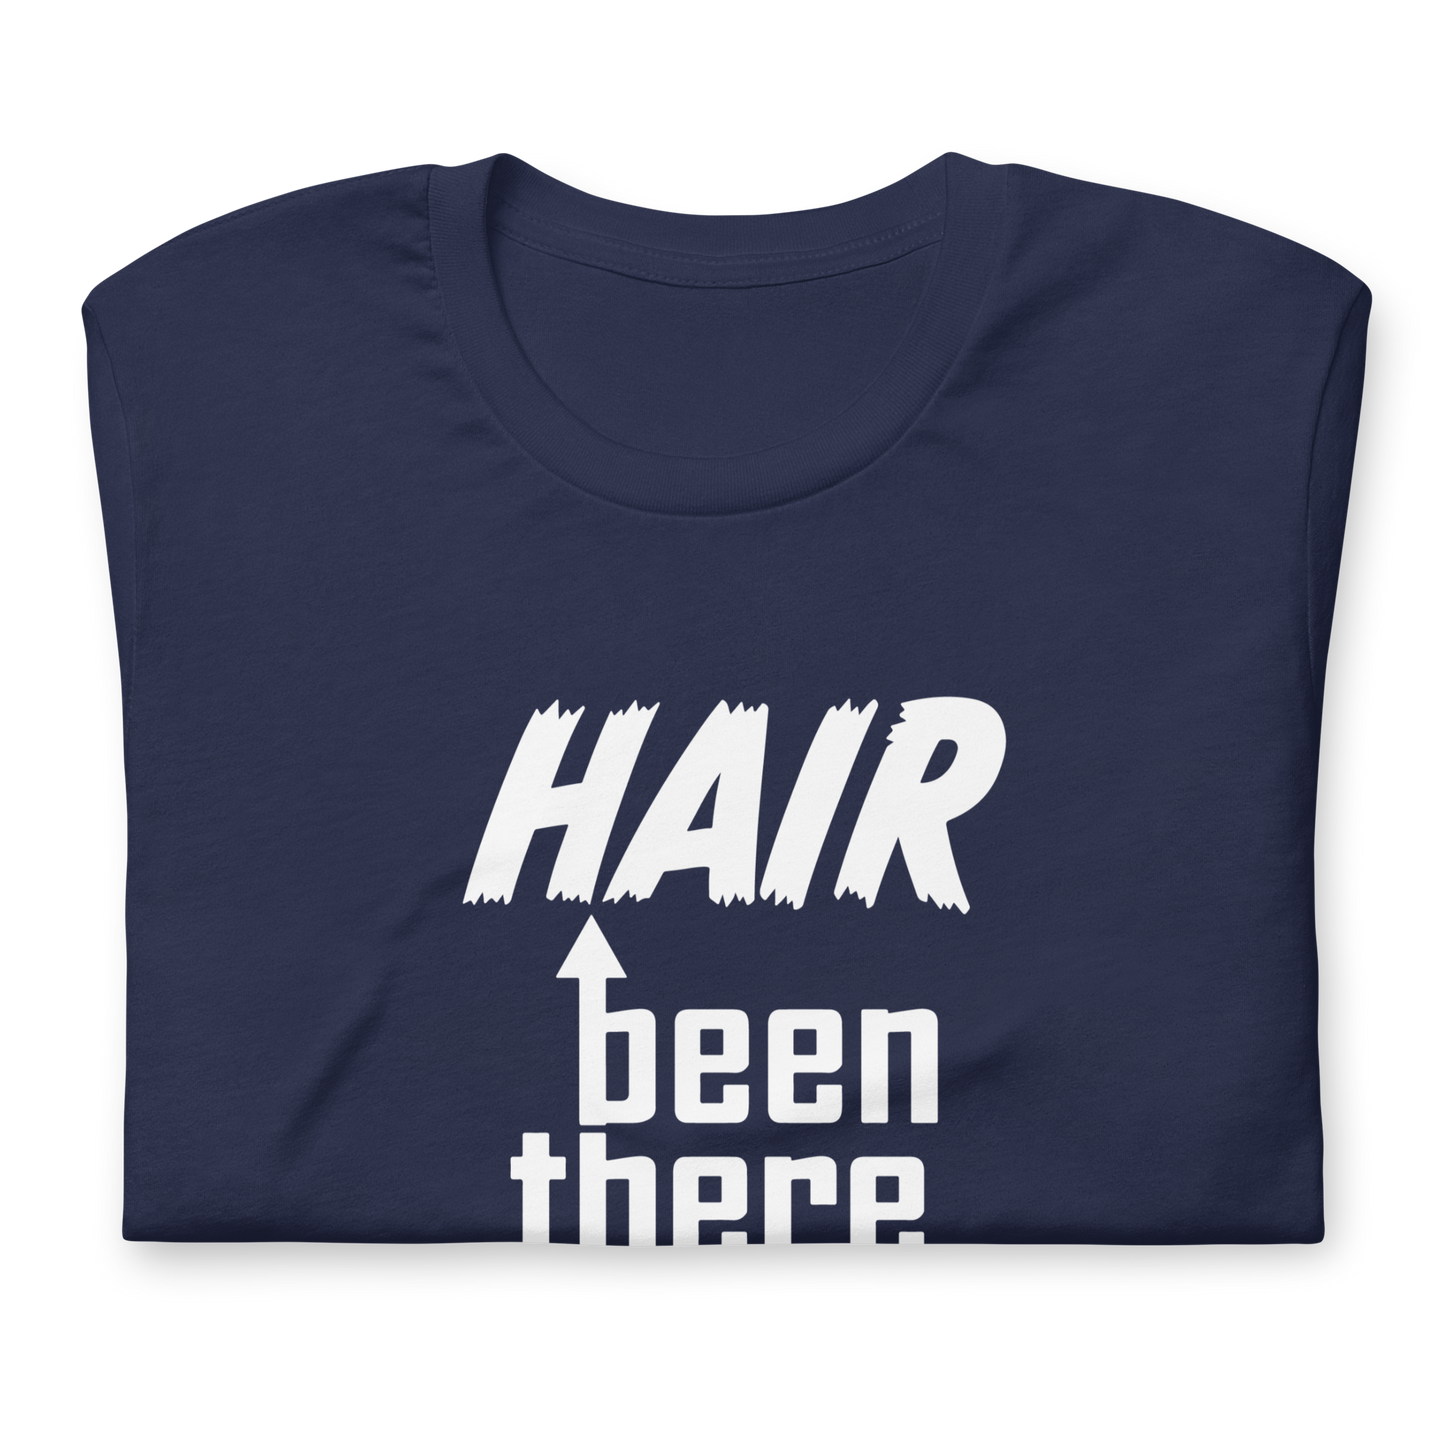 Hair Been There Done That t-shirt